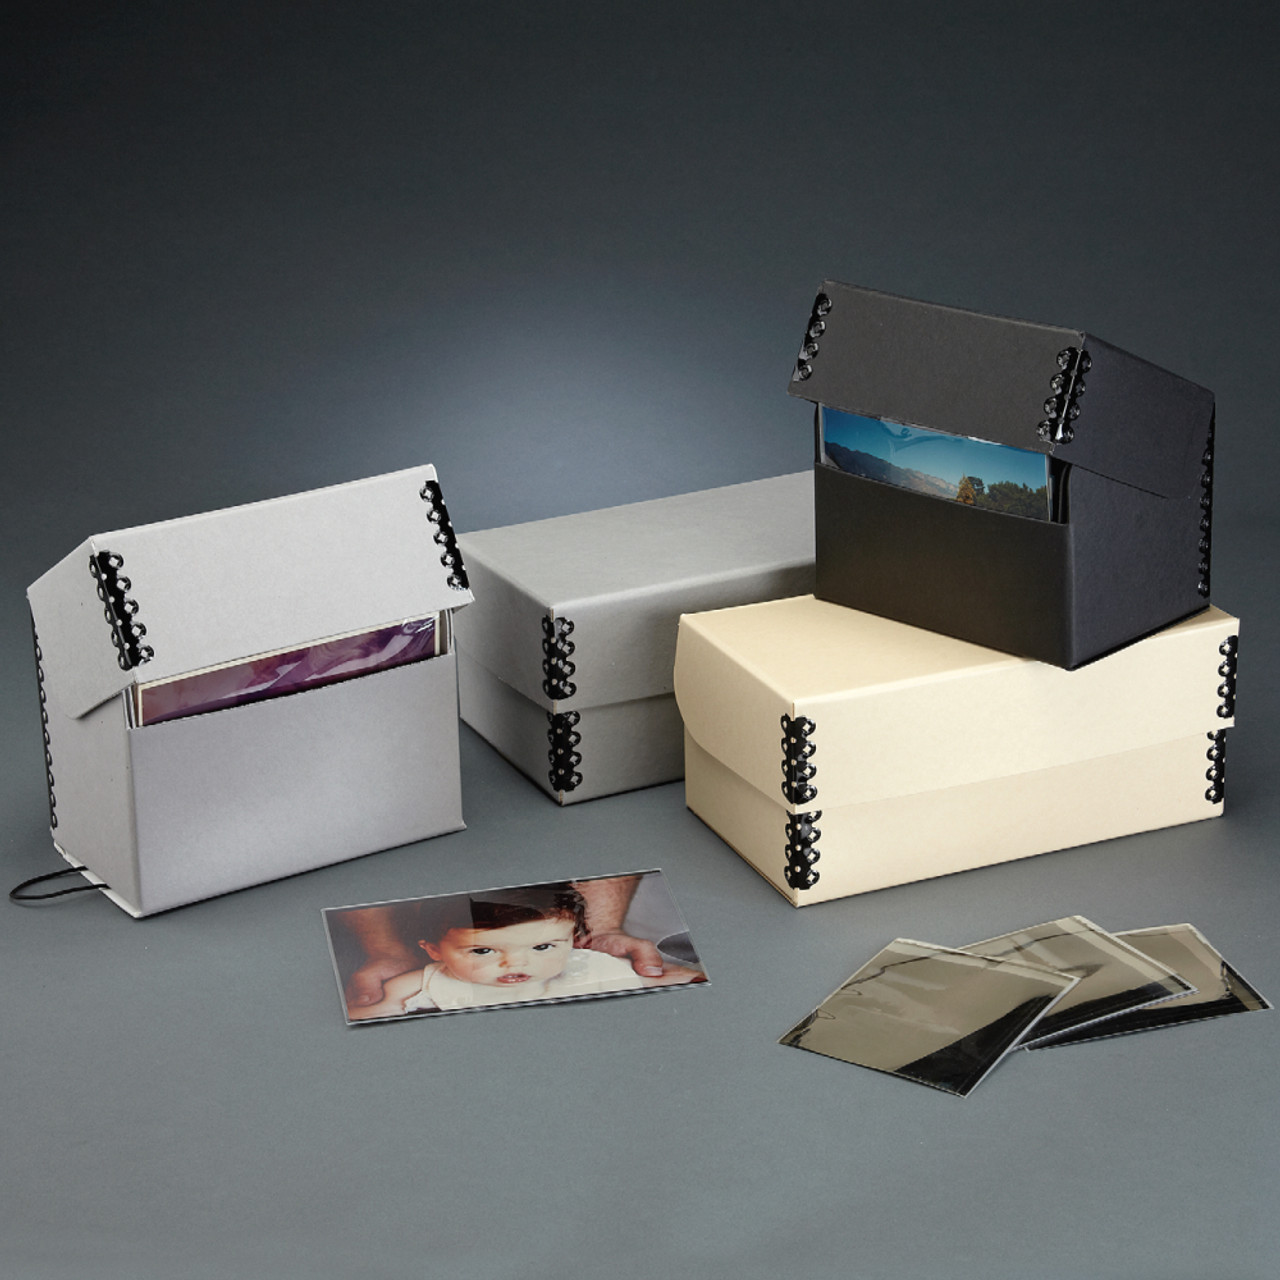 Archival acid free clear Newspaper Storage Pockets for protecting